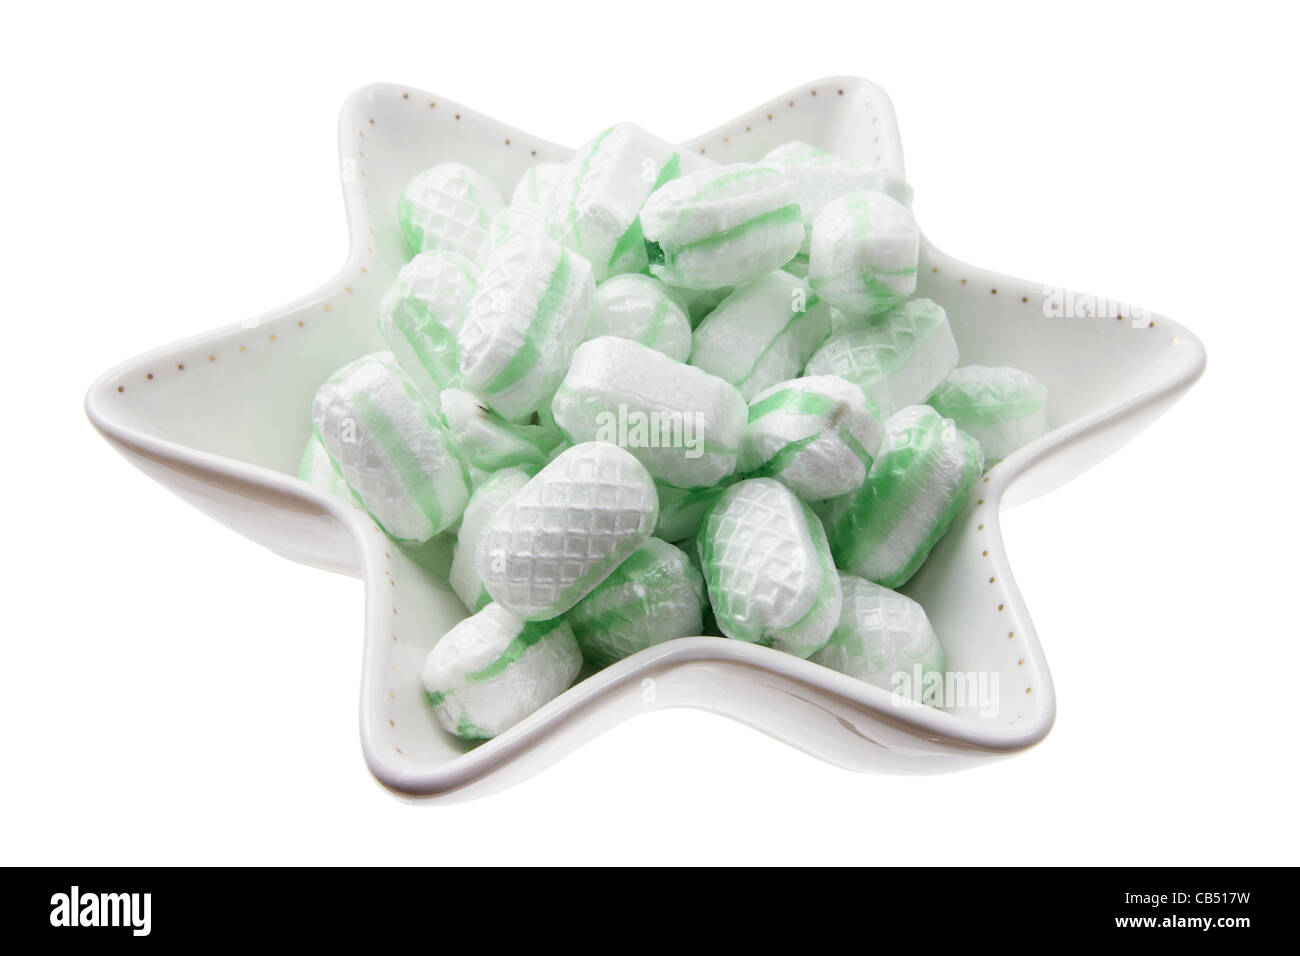 What does Lollies mean? - Definition of Lollies - Lollies stands for  sweets, mint candy. By